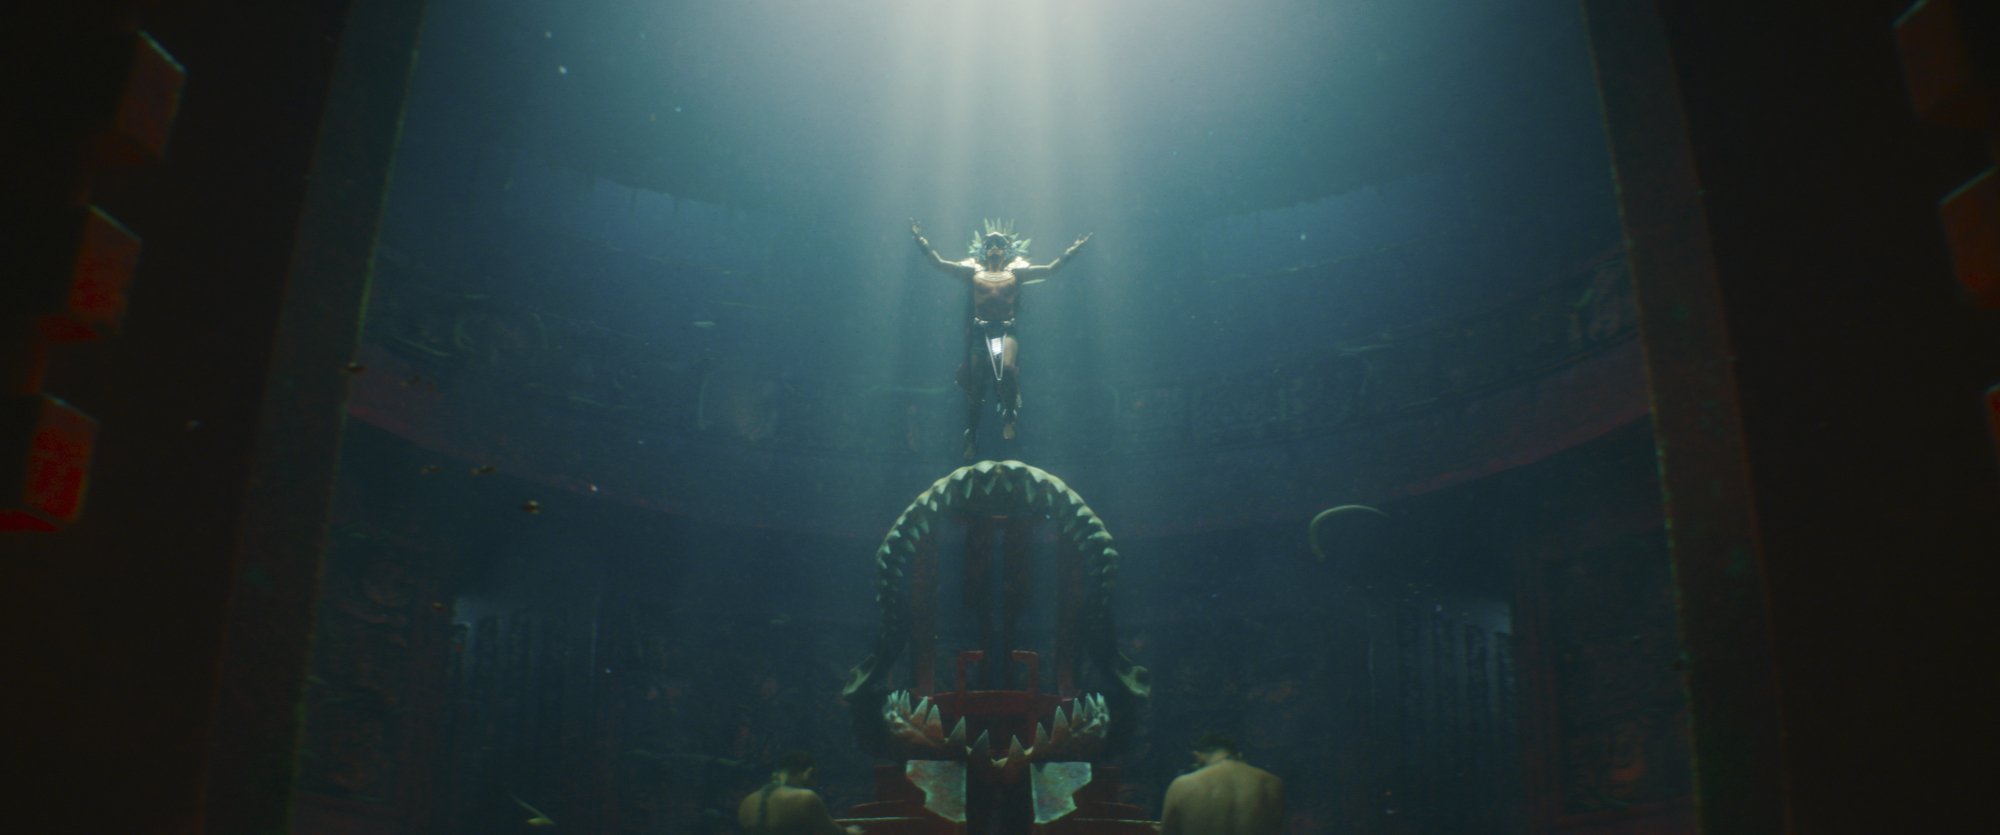 An underwater scene with a man-shaped being rising from a throne.